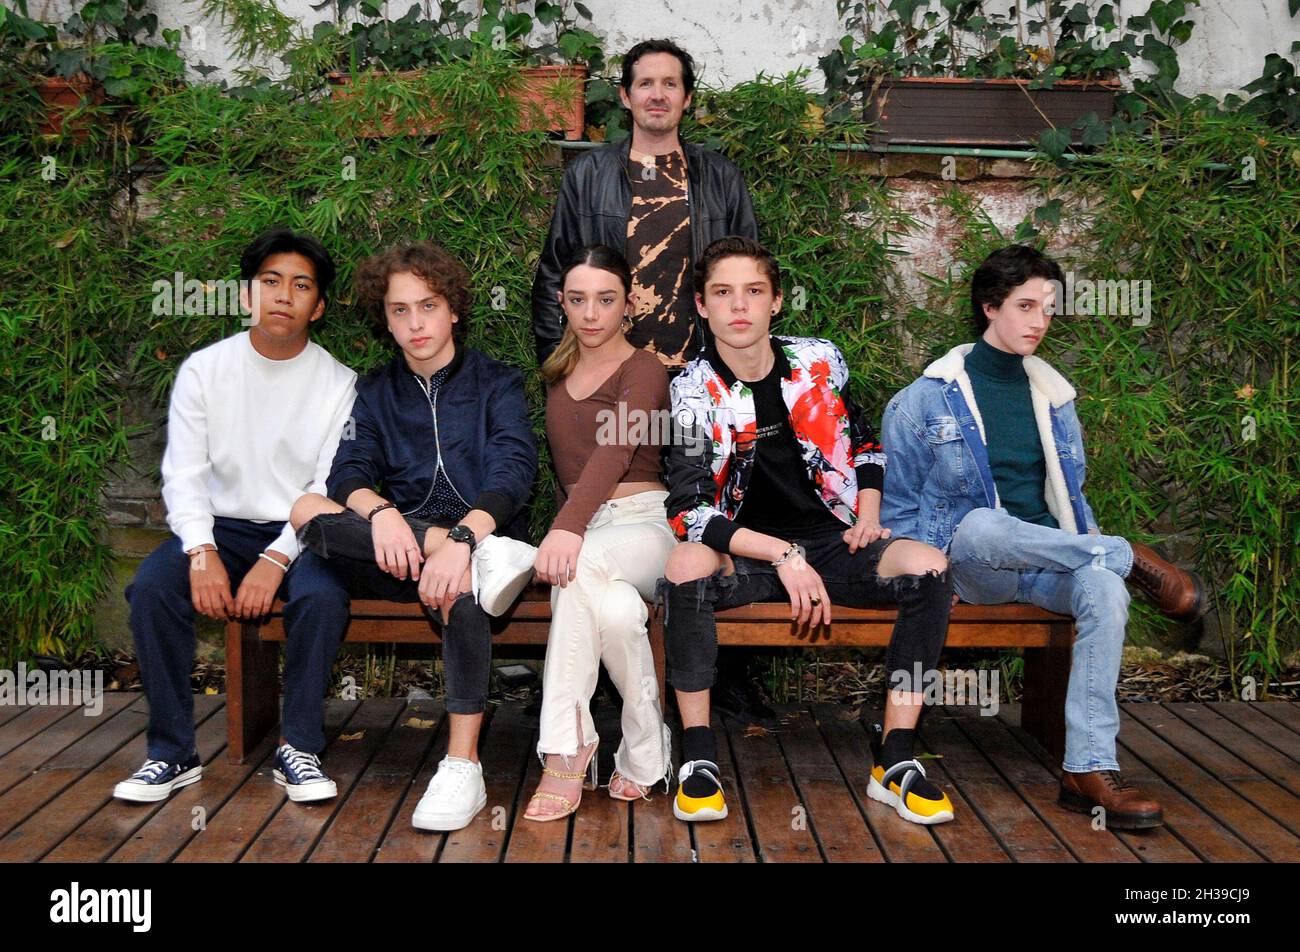 Mexico City, Mexico. October 26, 2021, Valeria Lamm, Yubáh Ortega, Santiago Barajas, Lucciano Kurti, Giovanni Conconi, Joaquín del Paso, pose for photos during a film Photocall to promote “The Hole in the Fence” as part of Morelia Film Festival. On October 26, 2021 in Mexico City, Mexico. (Photo by Martin Gonzalez/ Eyepix Group) Stock Photo